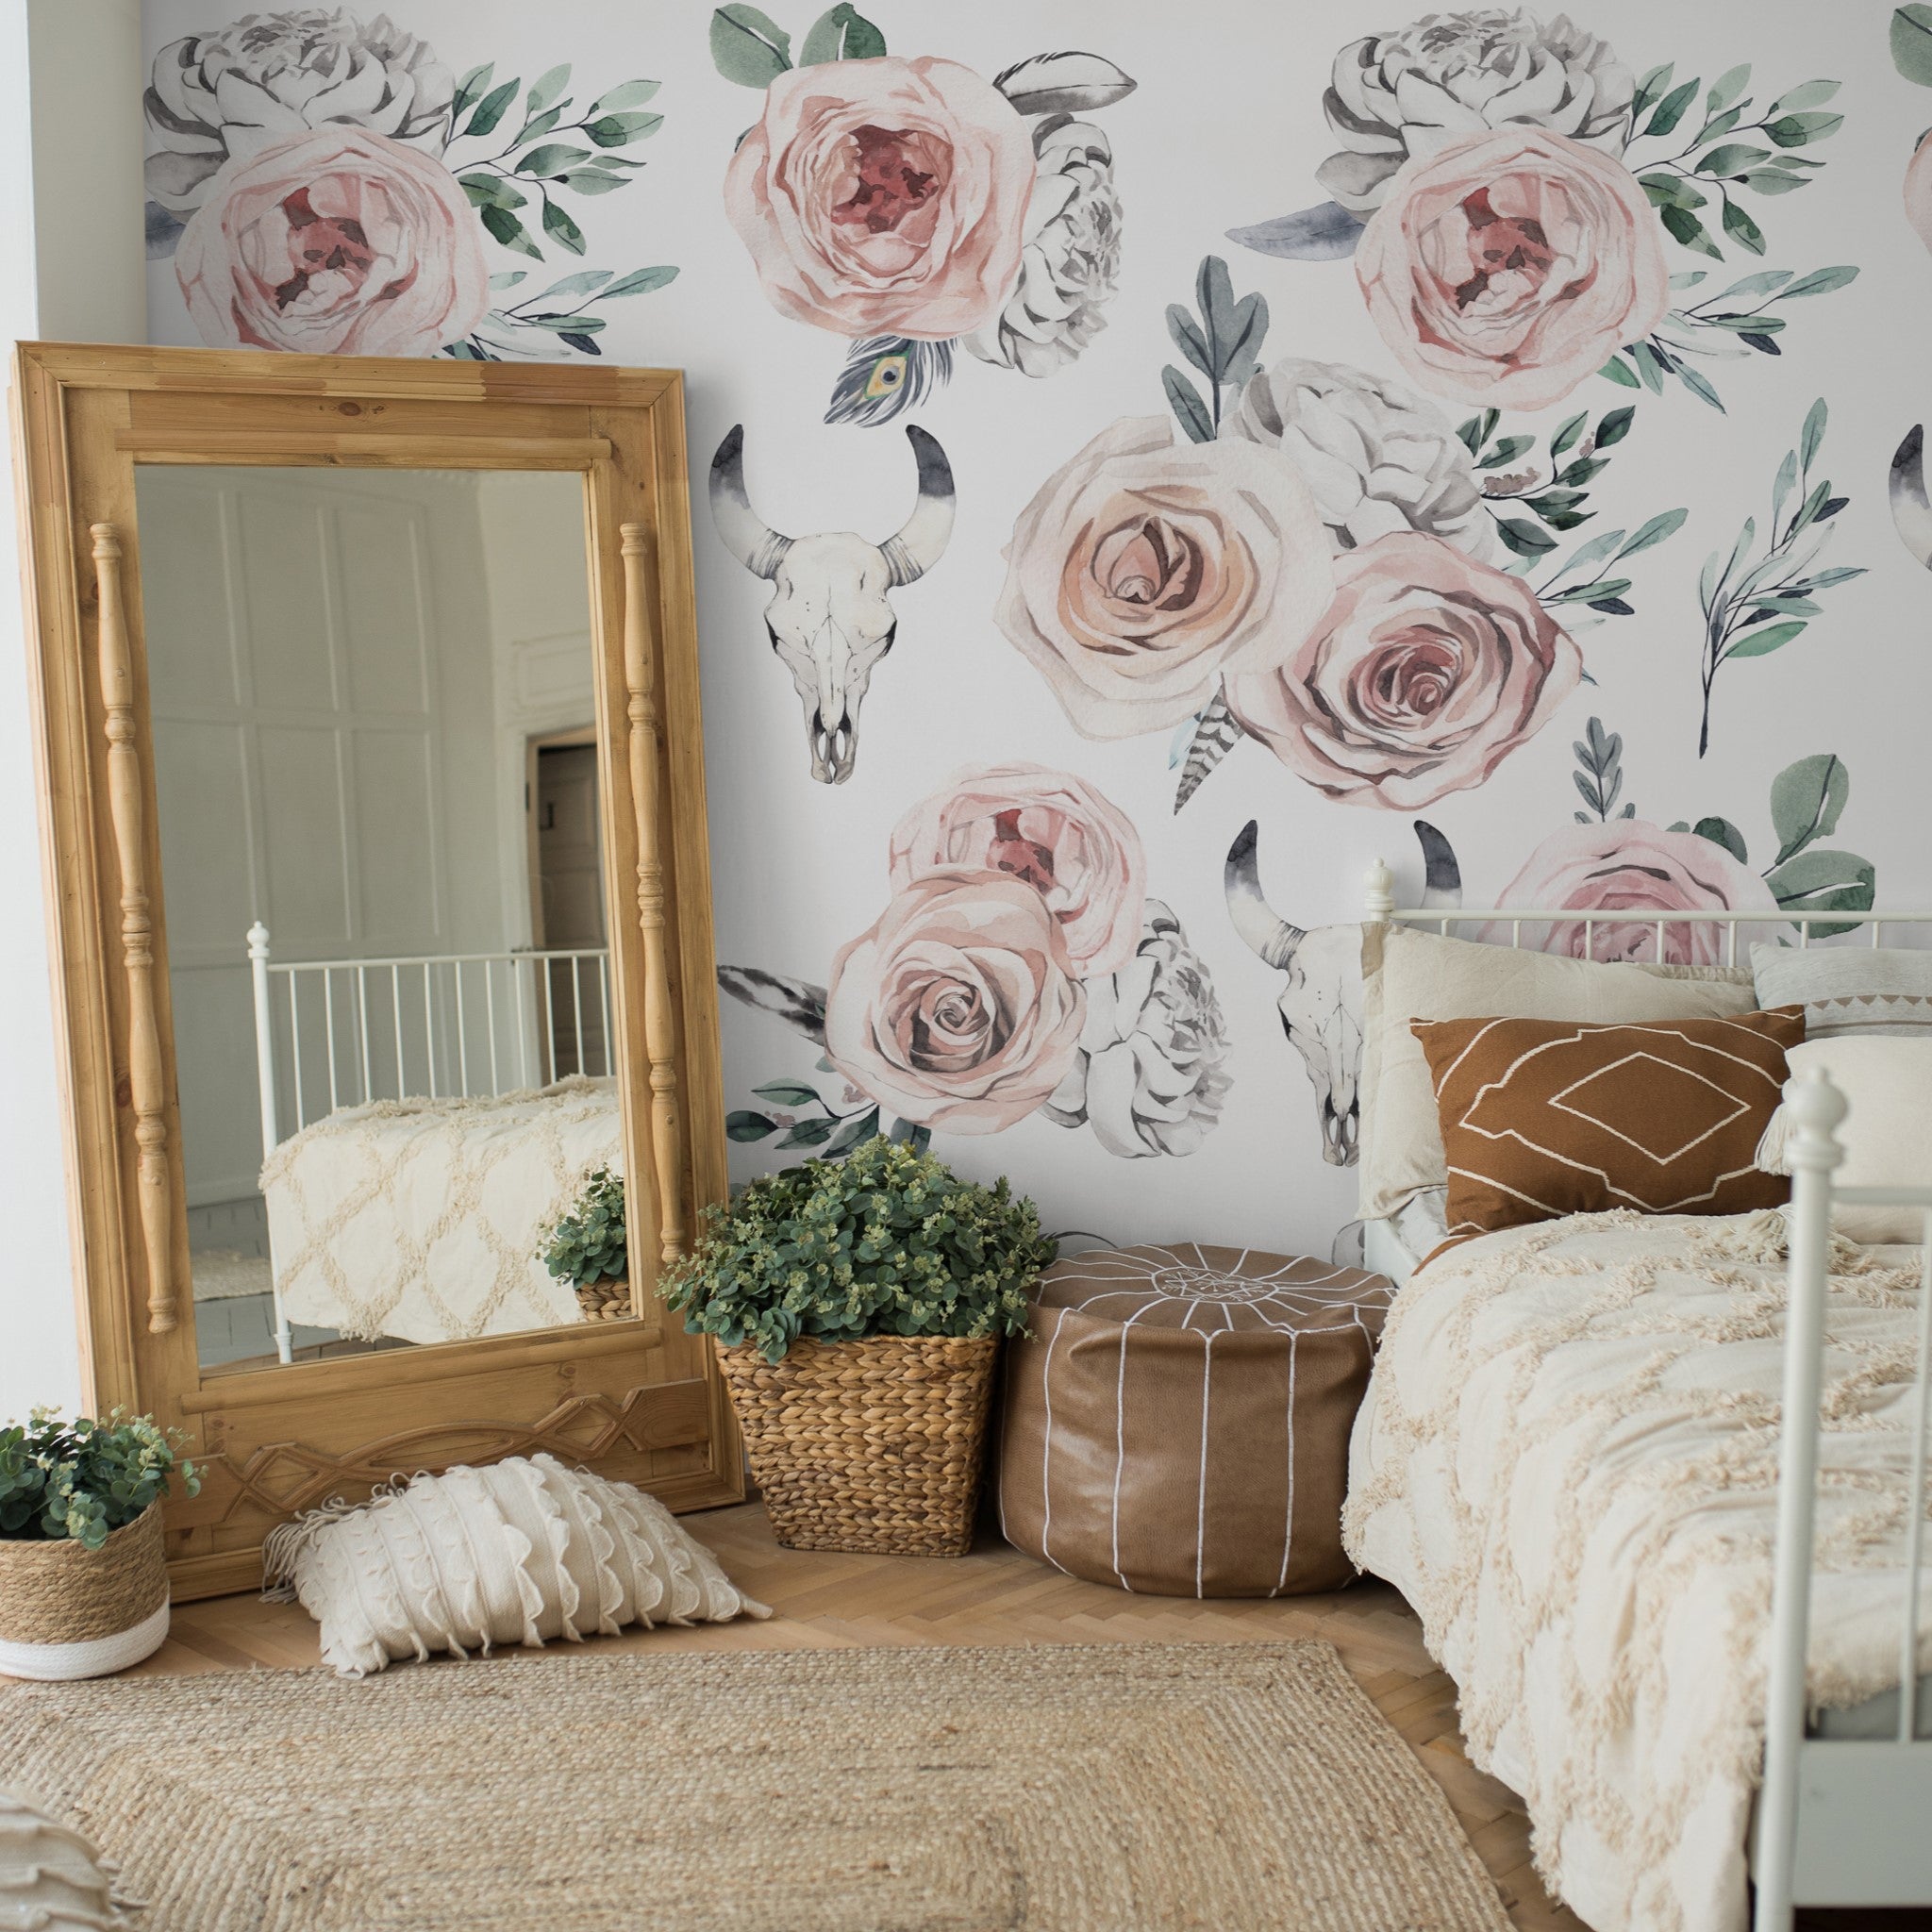 "Nomad Wallpaper by Wall Blush in a stylish bedroom, highlighting floral design and room decor."